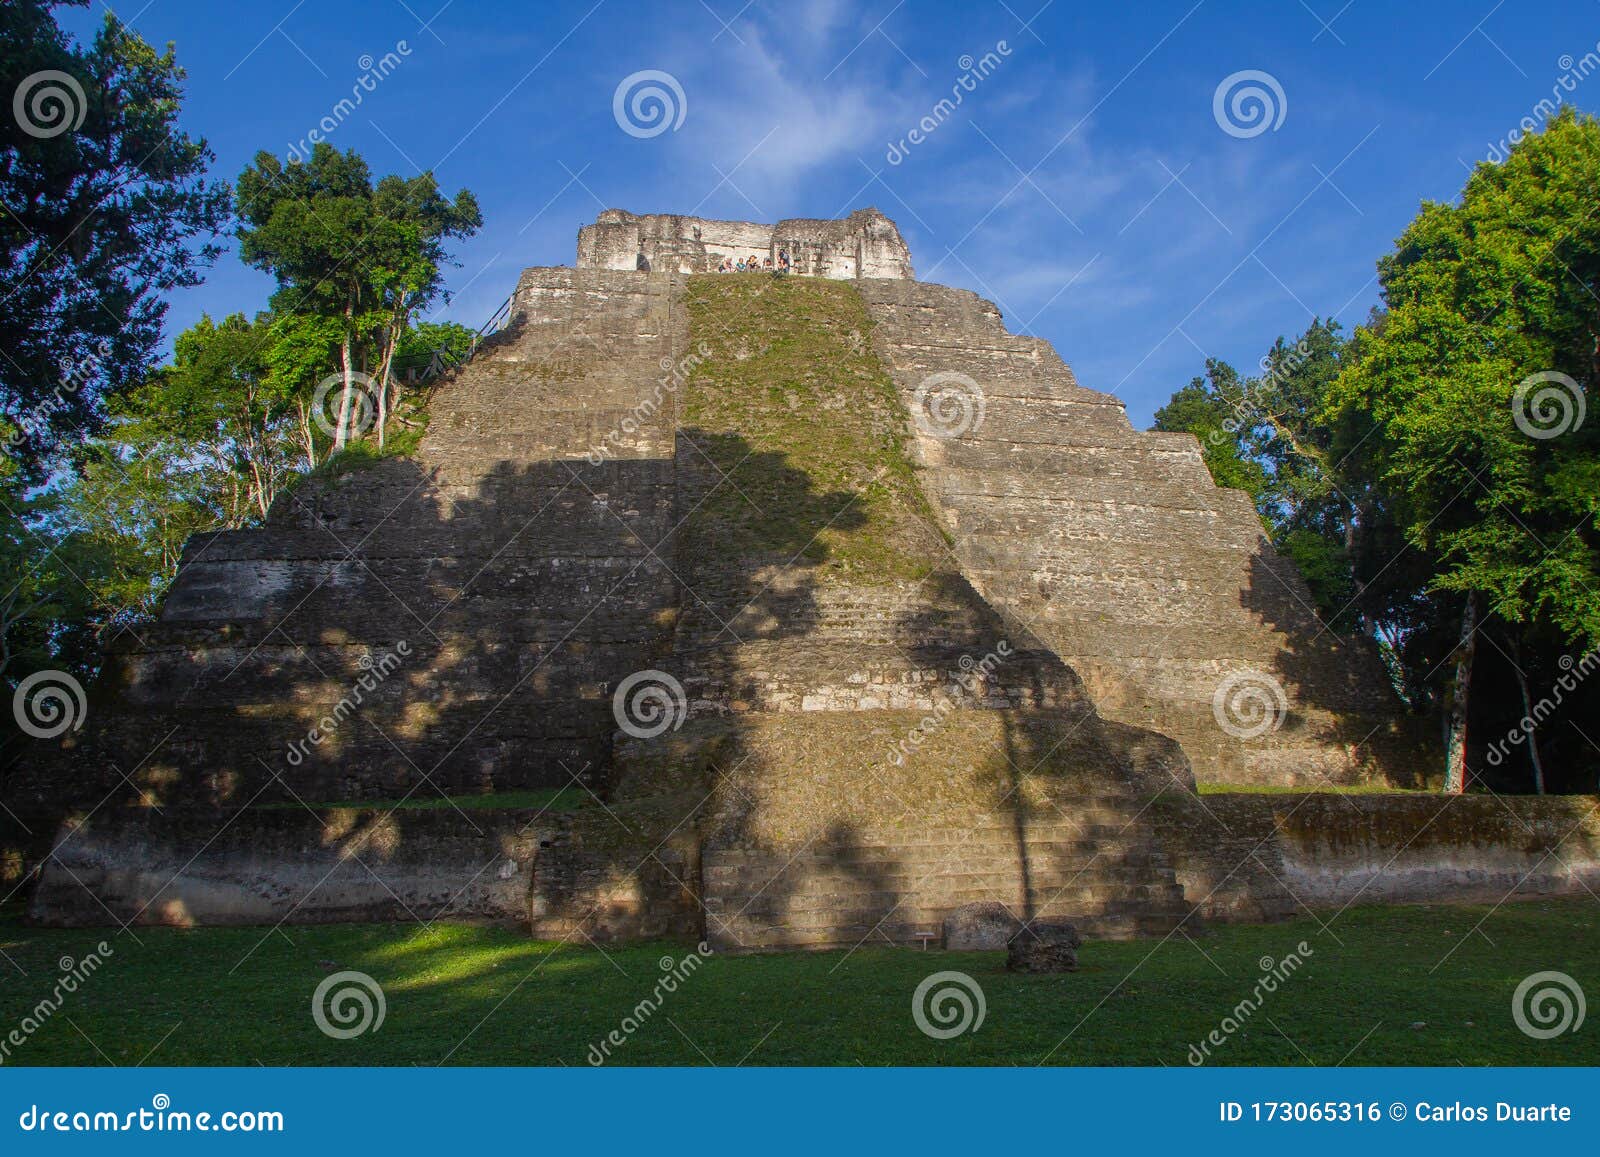 archaeological site: yaxha, the third largest mayan city in the mesoamerican region